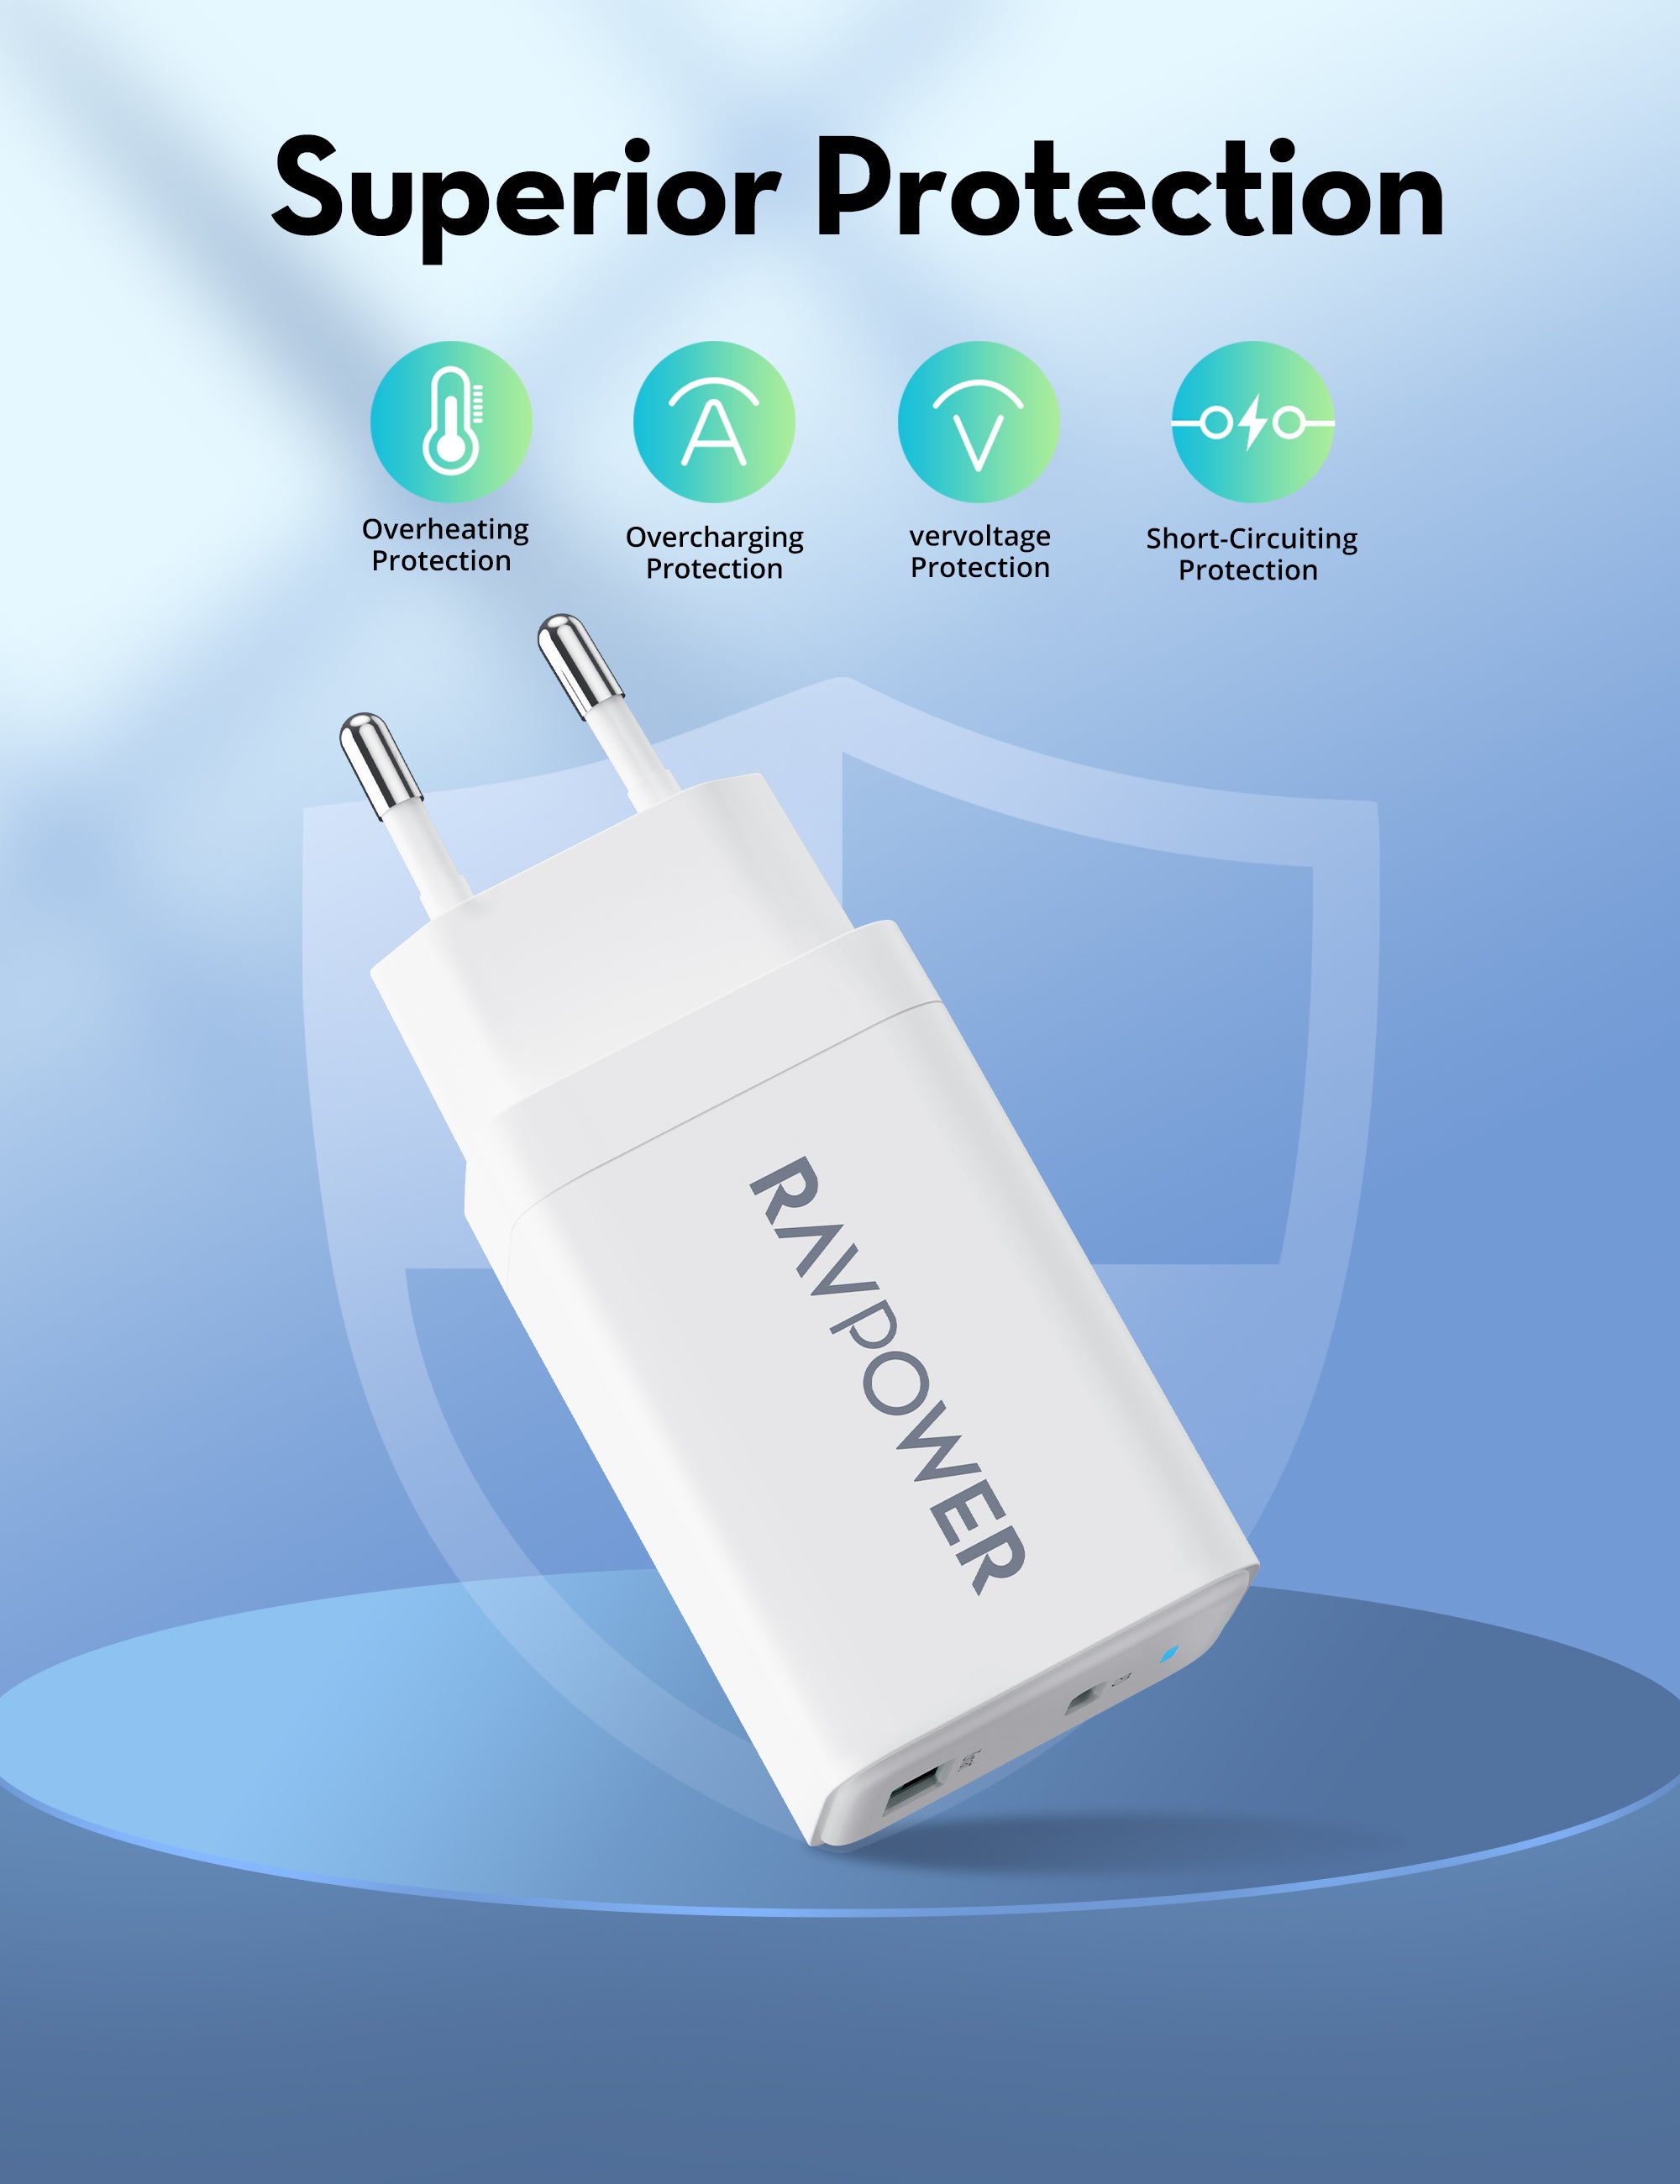 RAVPower PD 45W 2-Port Wall Charger